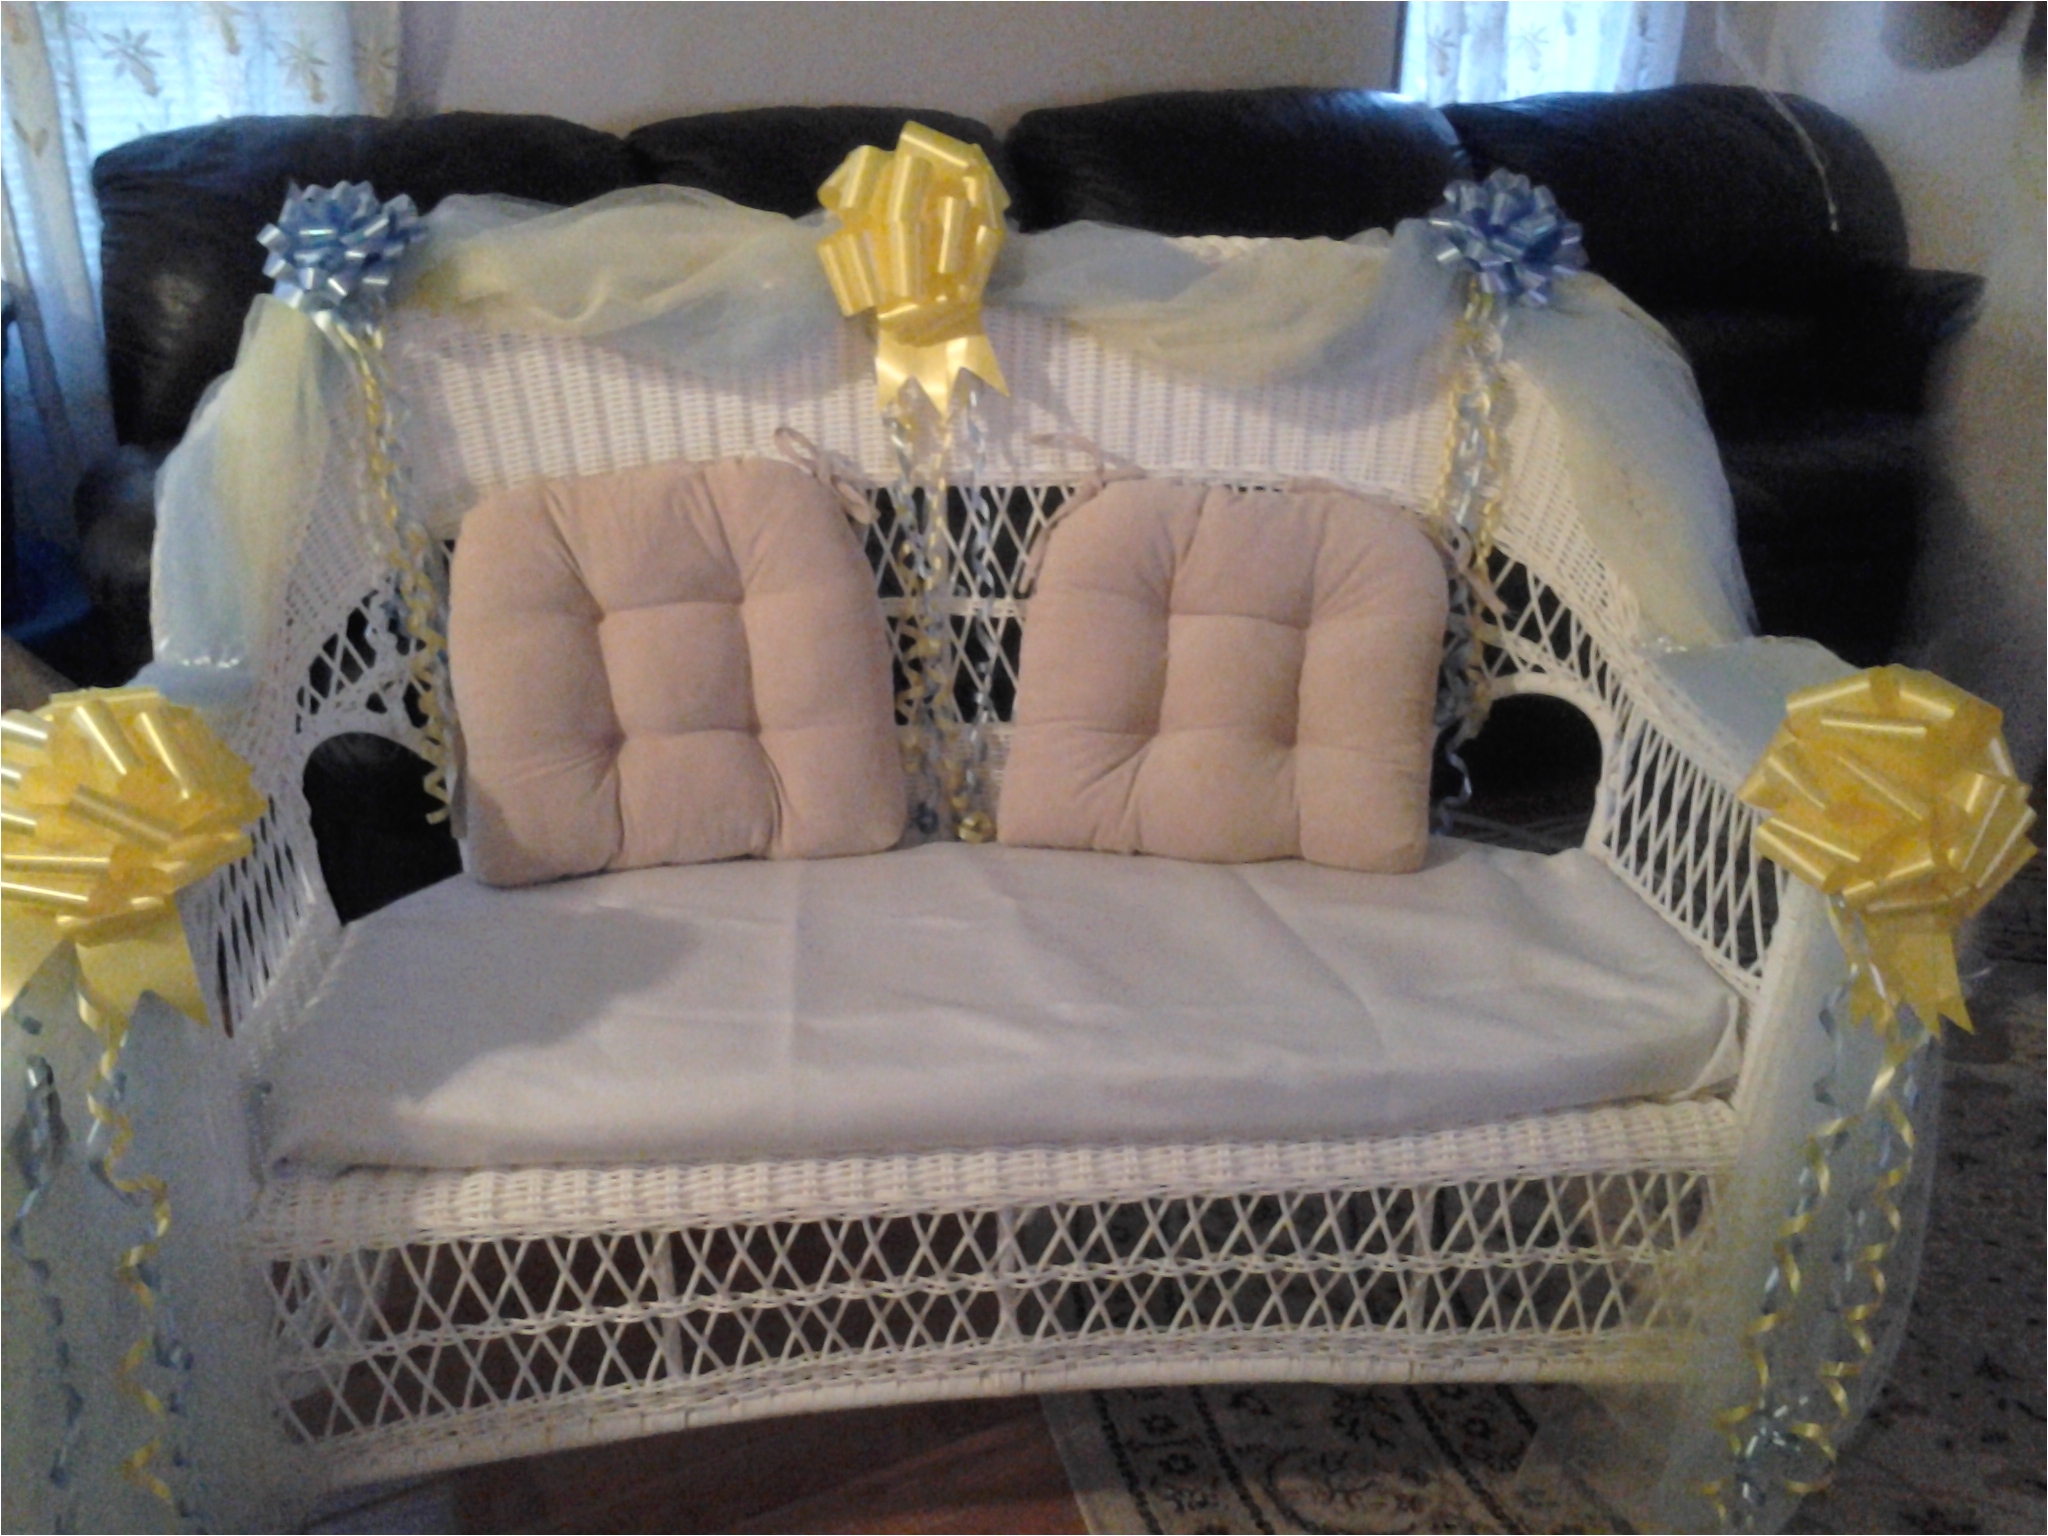 Baby Shower Chairs for Rent In Ct Outstanding Shower Chair Cost Pattern Bathroom with Bathtub Ideas